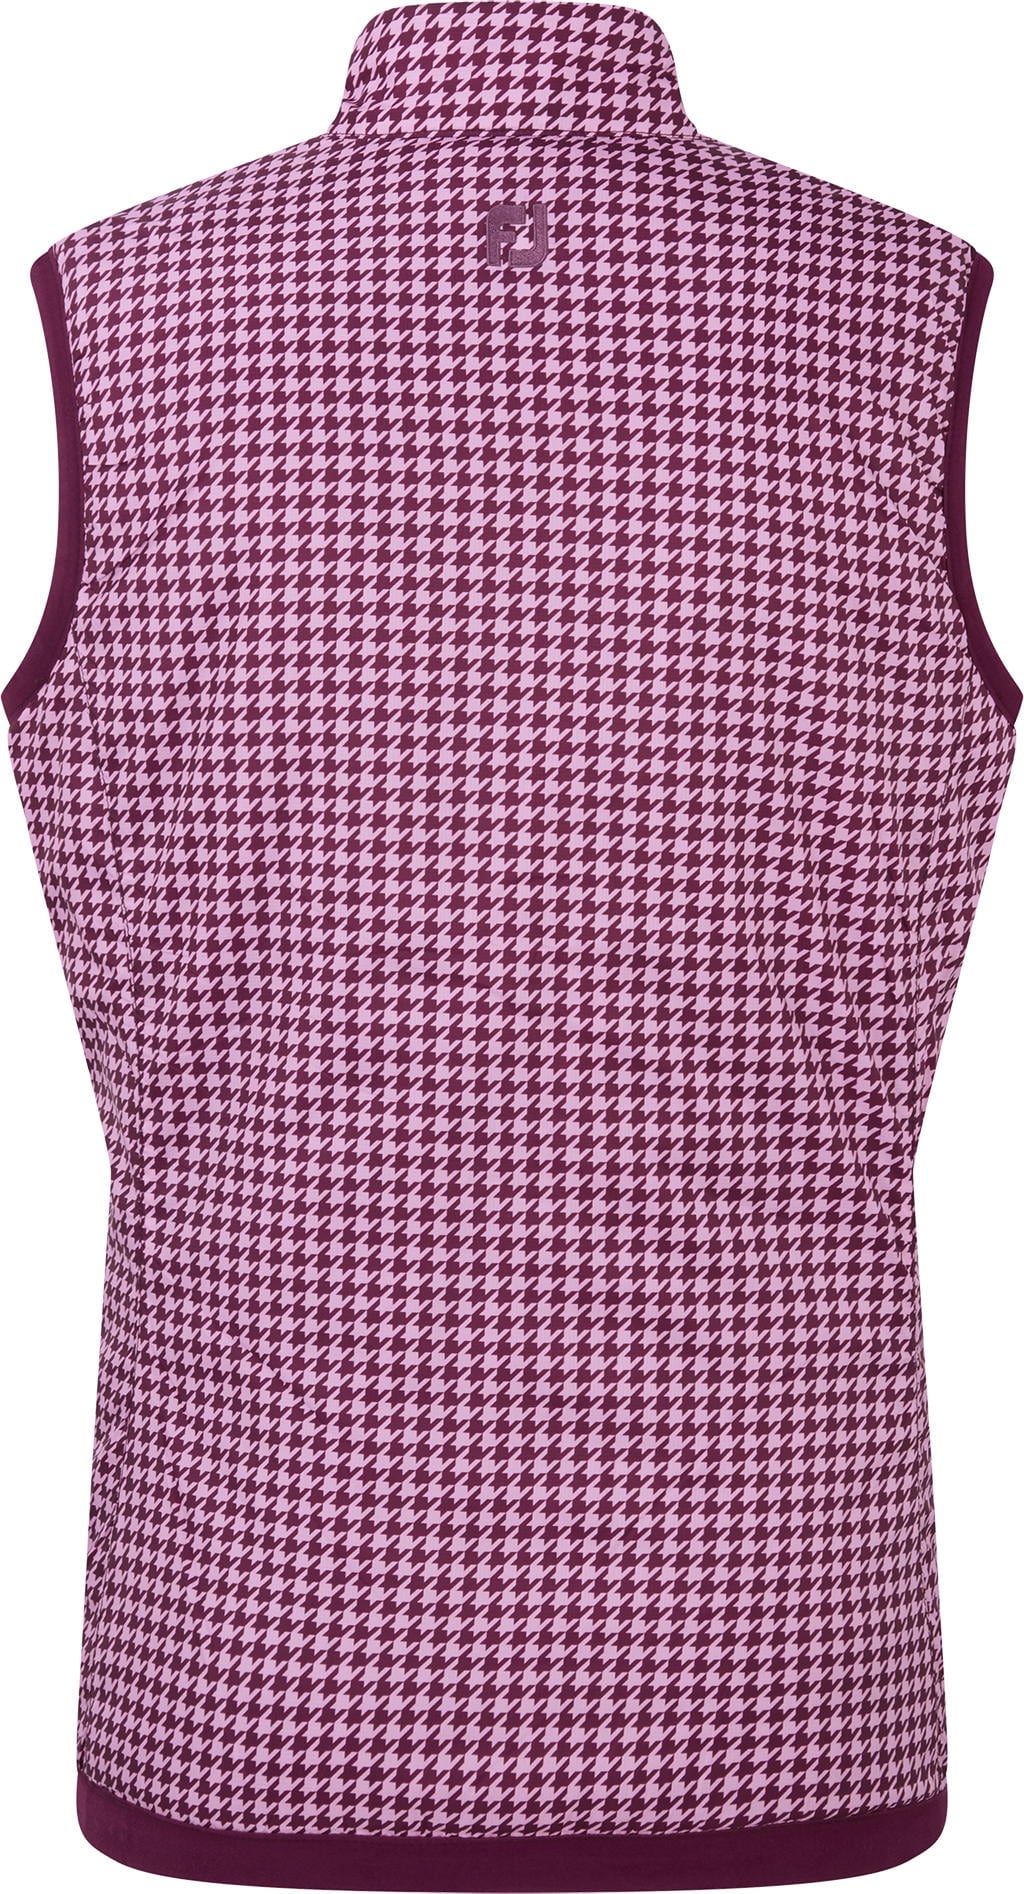 FootJoy Insulated Reversible Weste, fig/pink